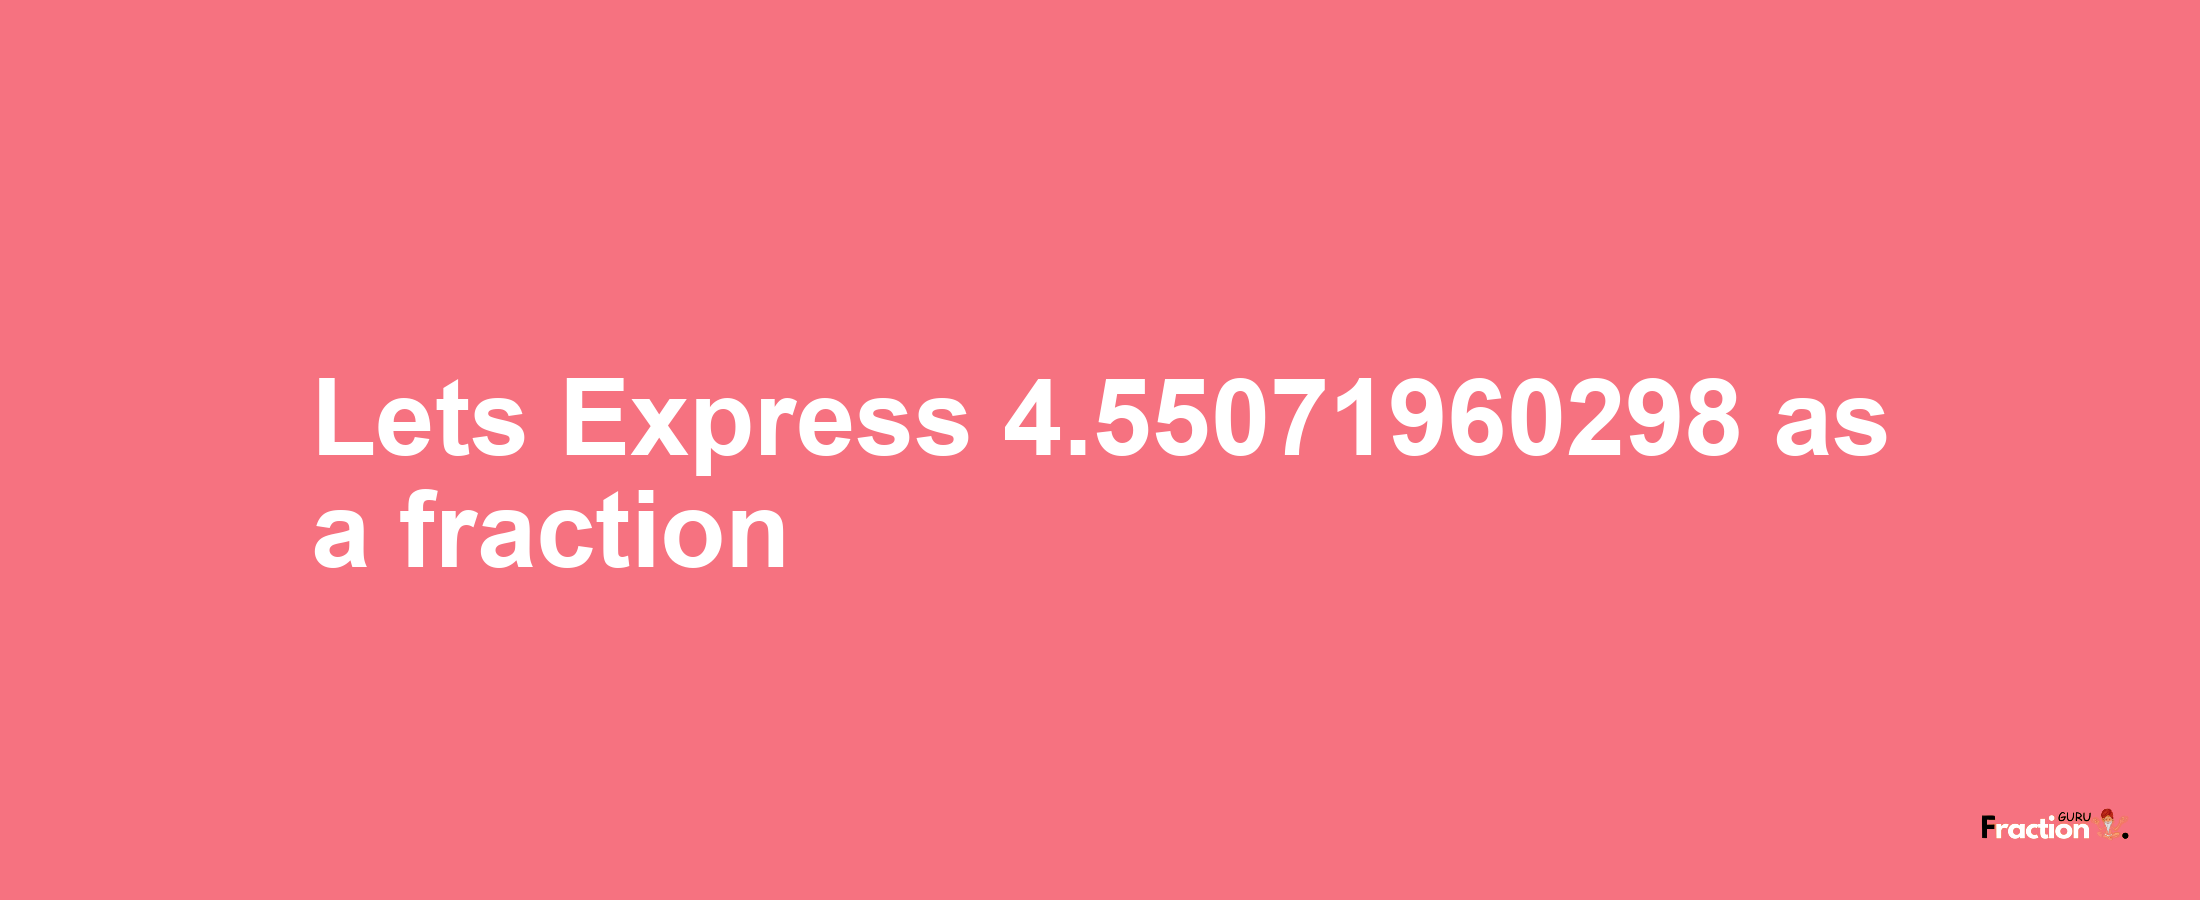 Lets Express 4.55071960298 as afraction